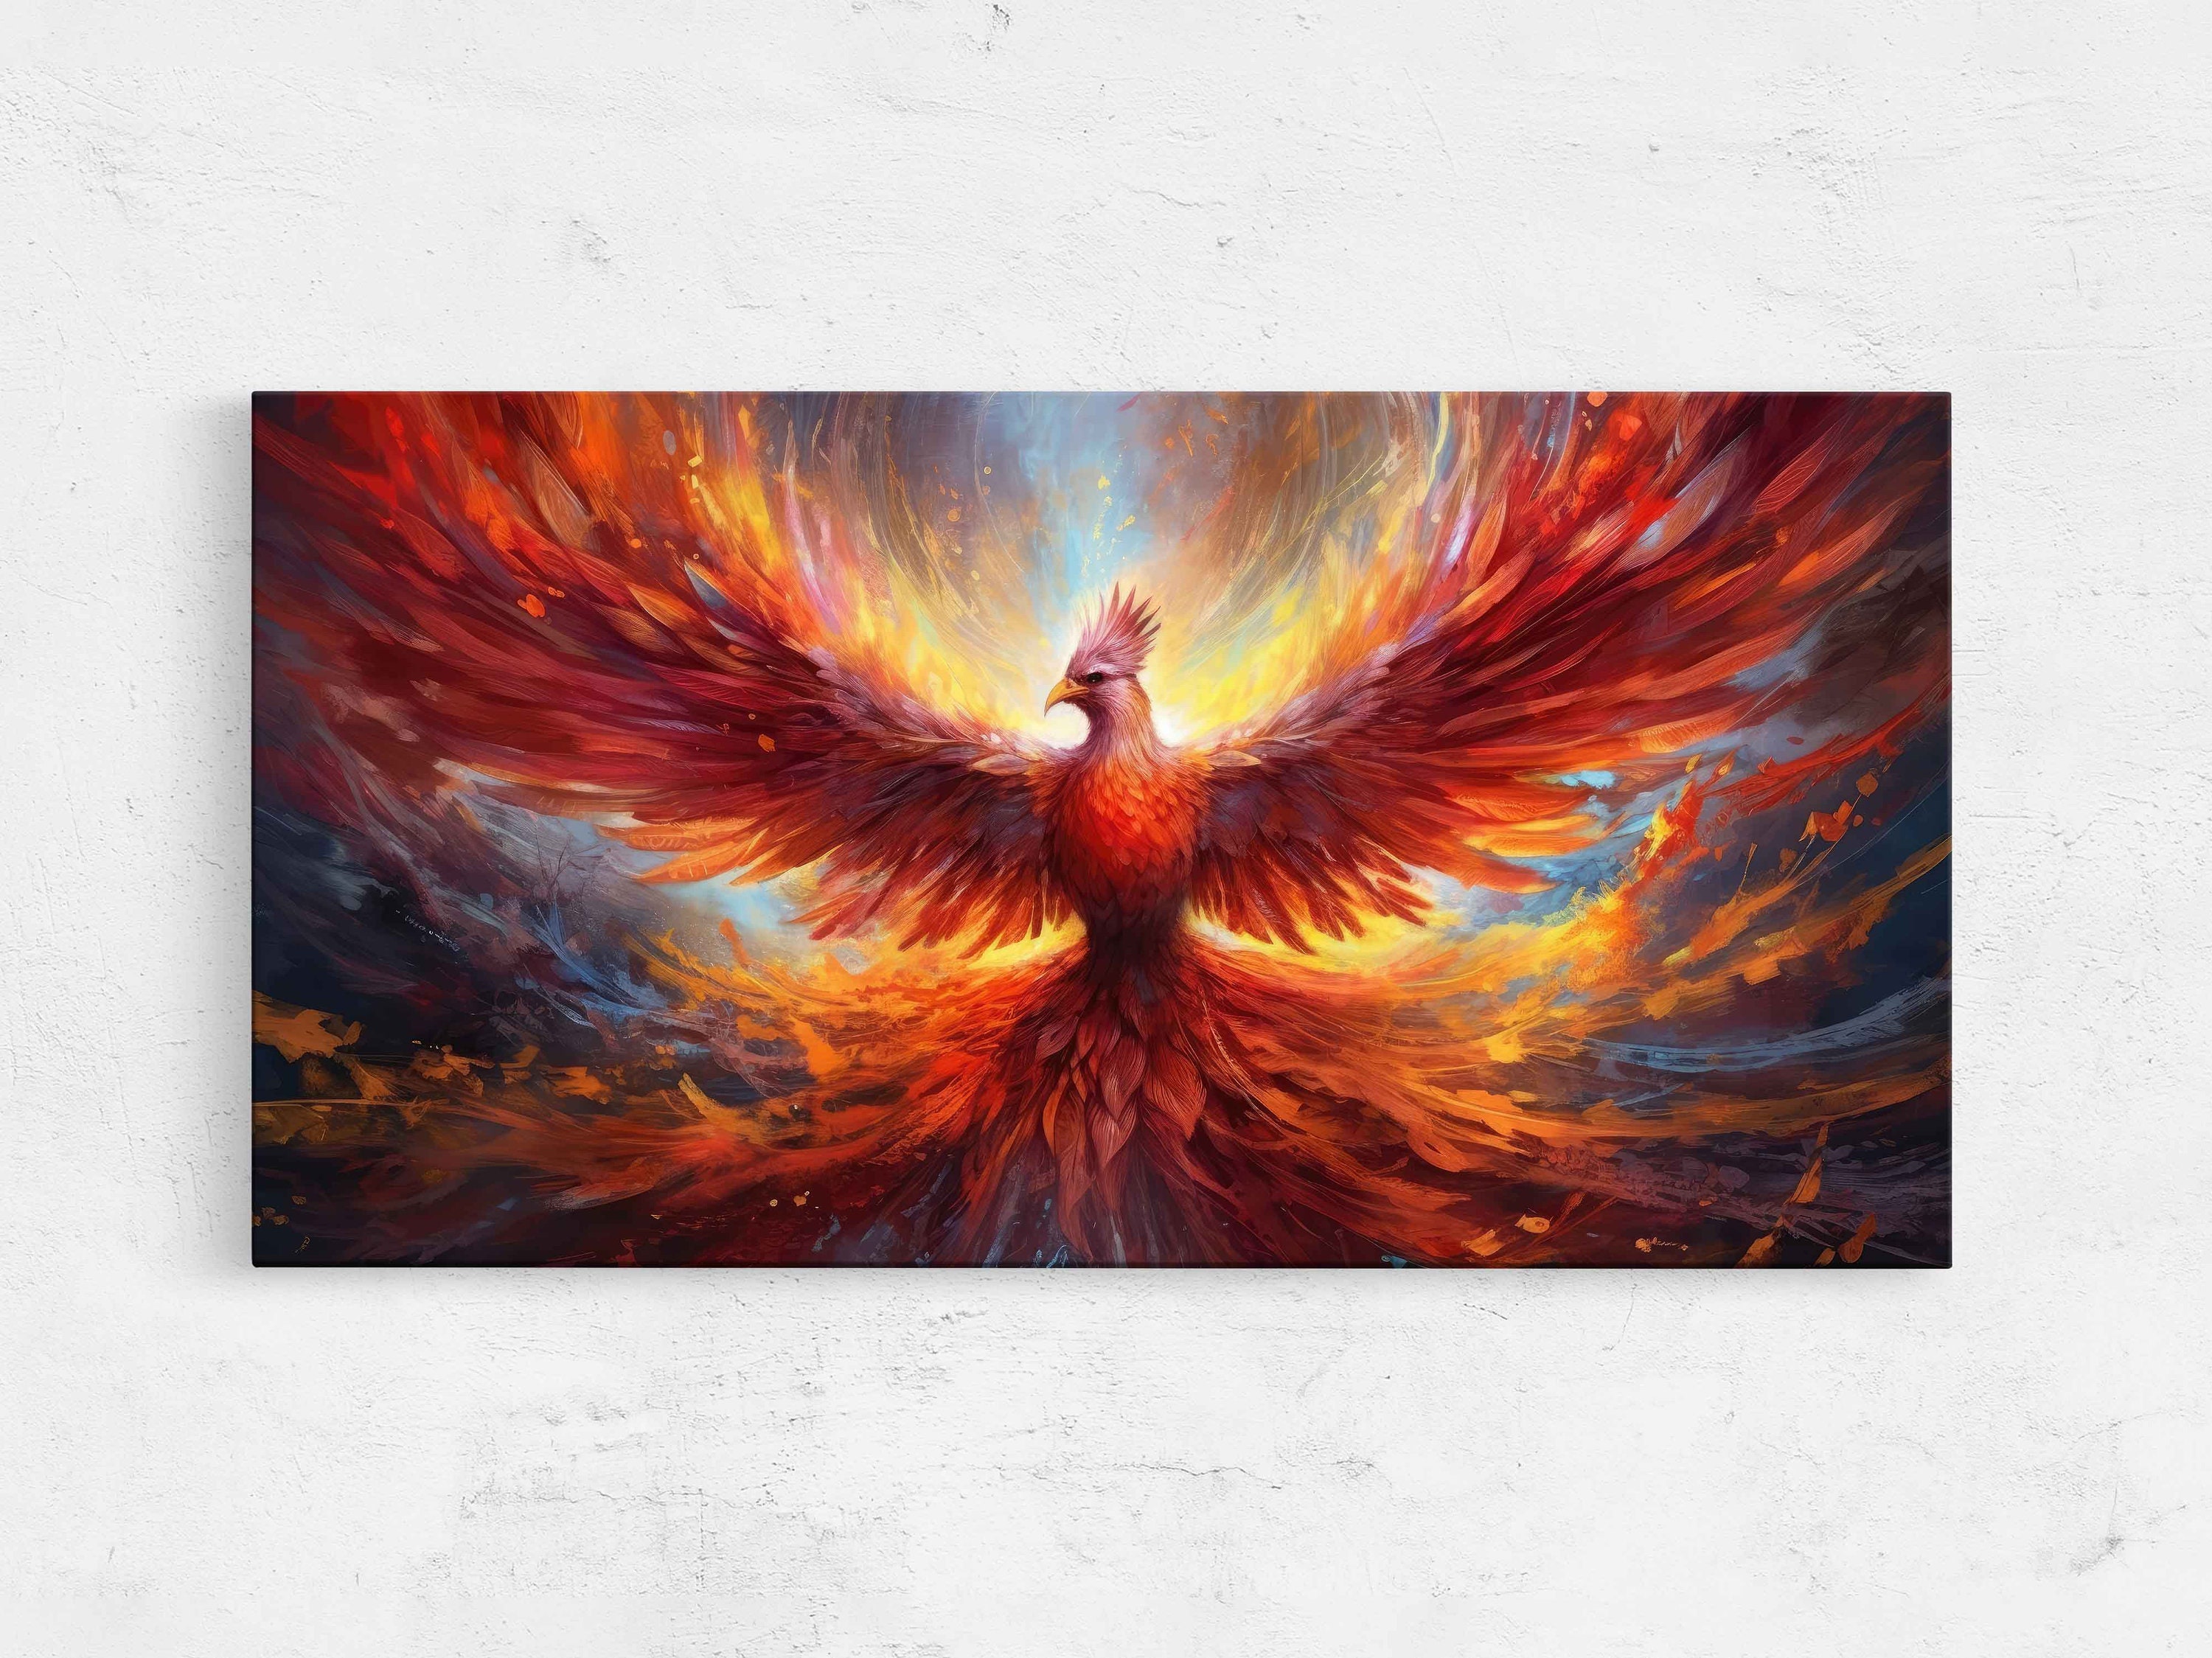  PHOENIX Watercolor Stretched Canvases, 10x20 Inch/4